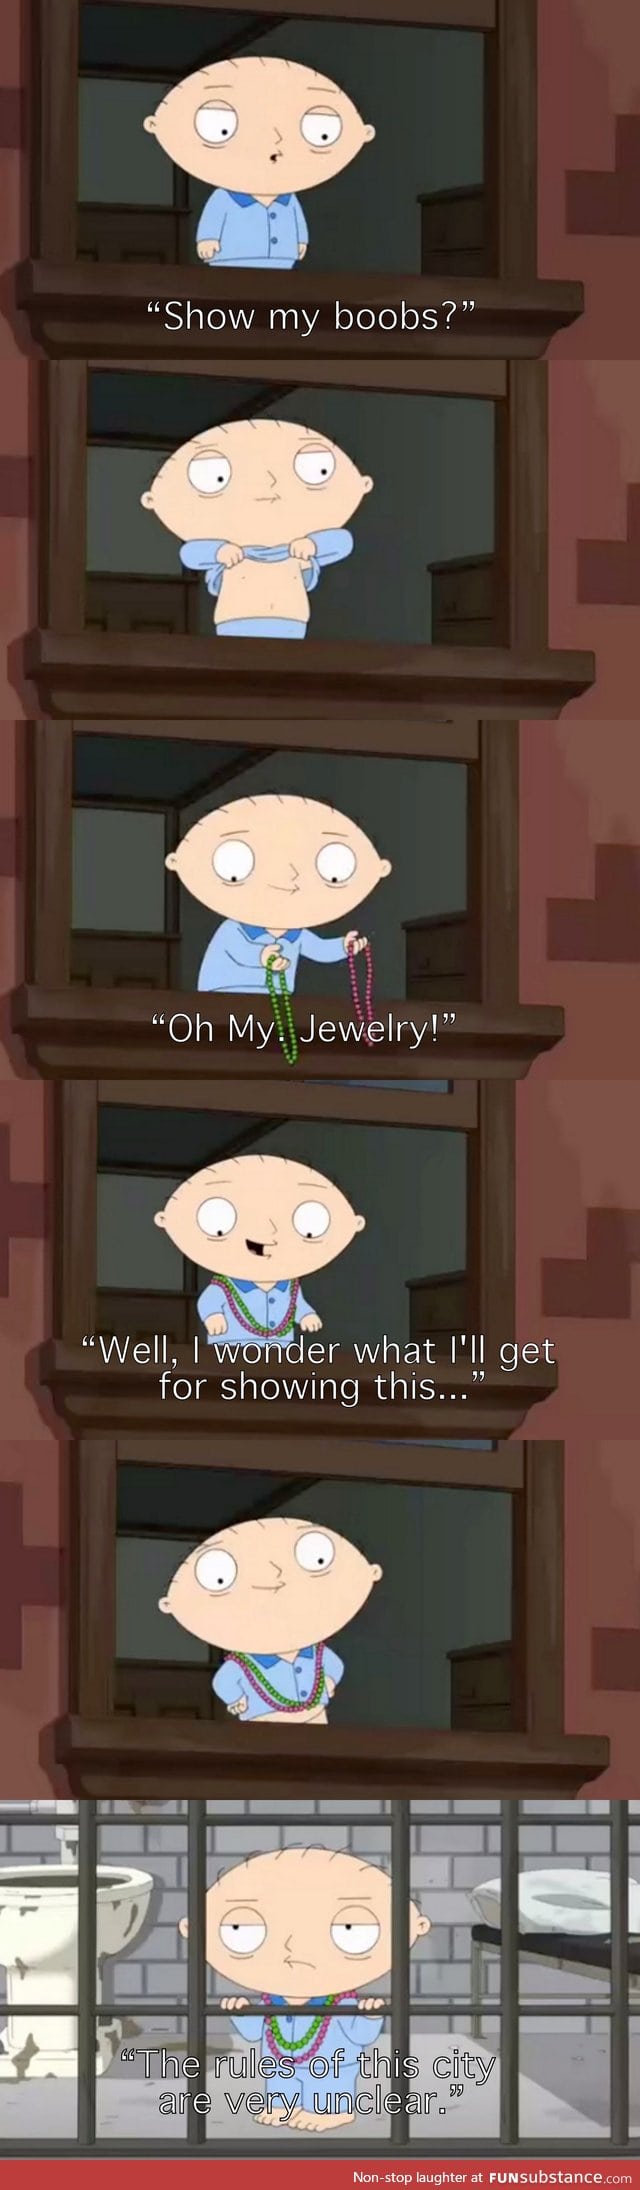 Stewie is right about New Orleans